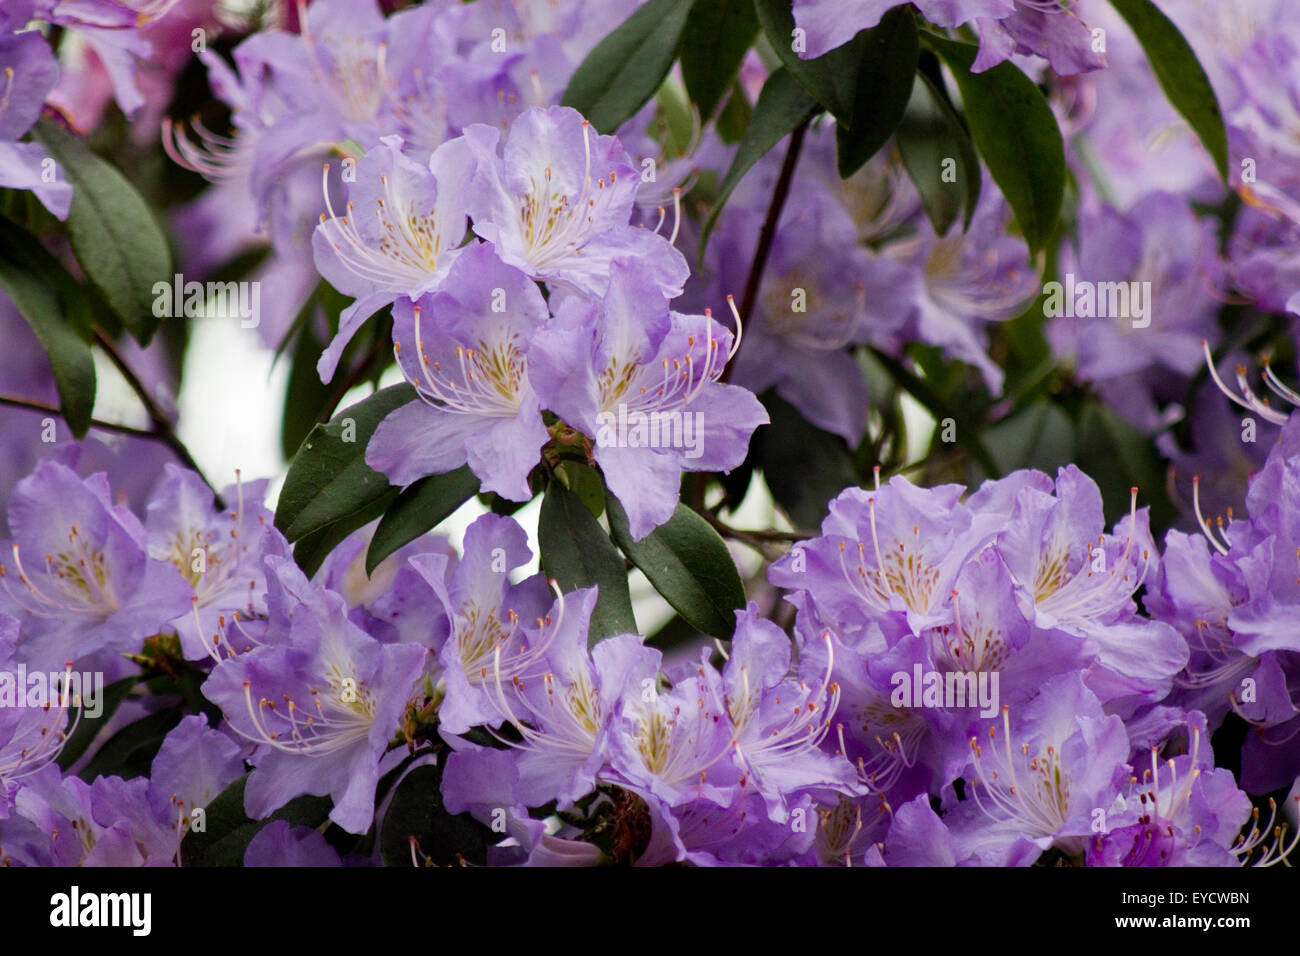 Glorious crowds of wild lilac blossoms fill the frame as they gather to welcome the Spring. Stock Photo